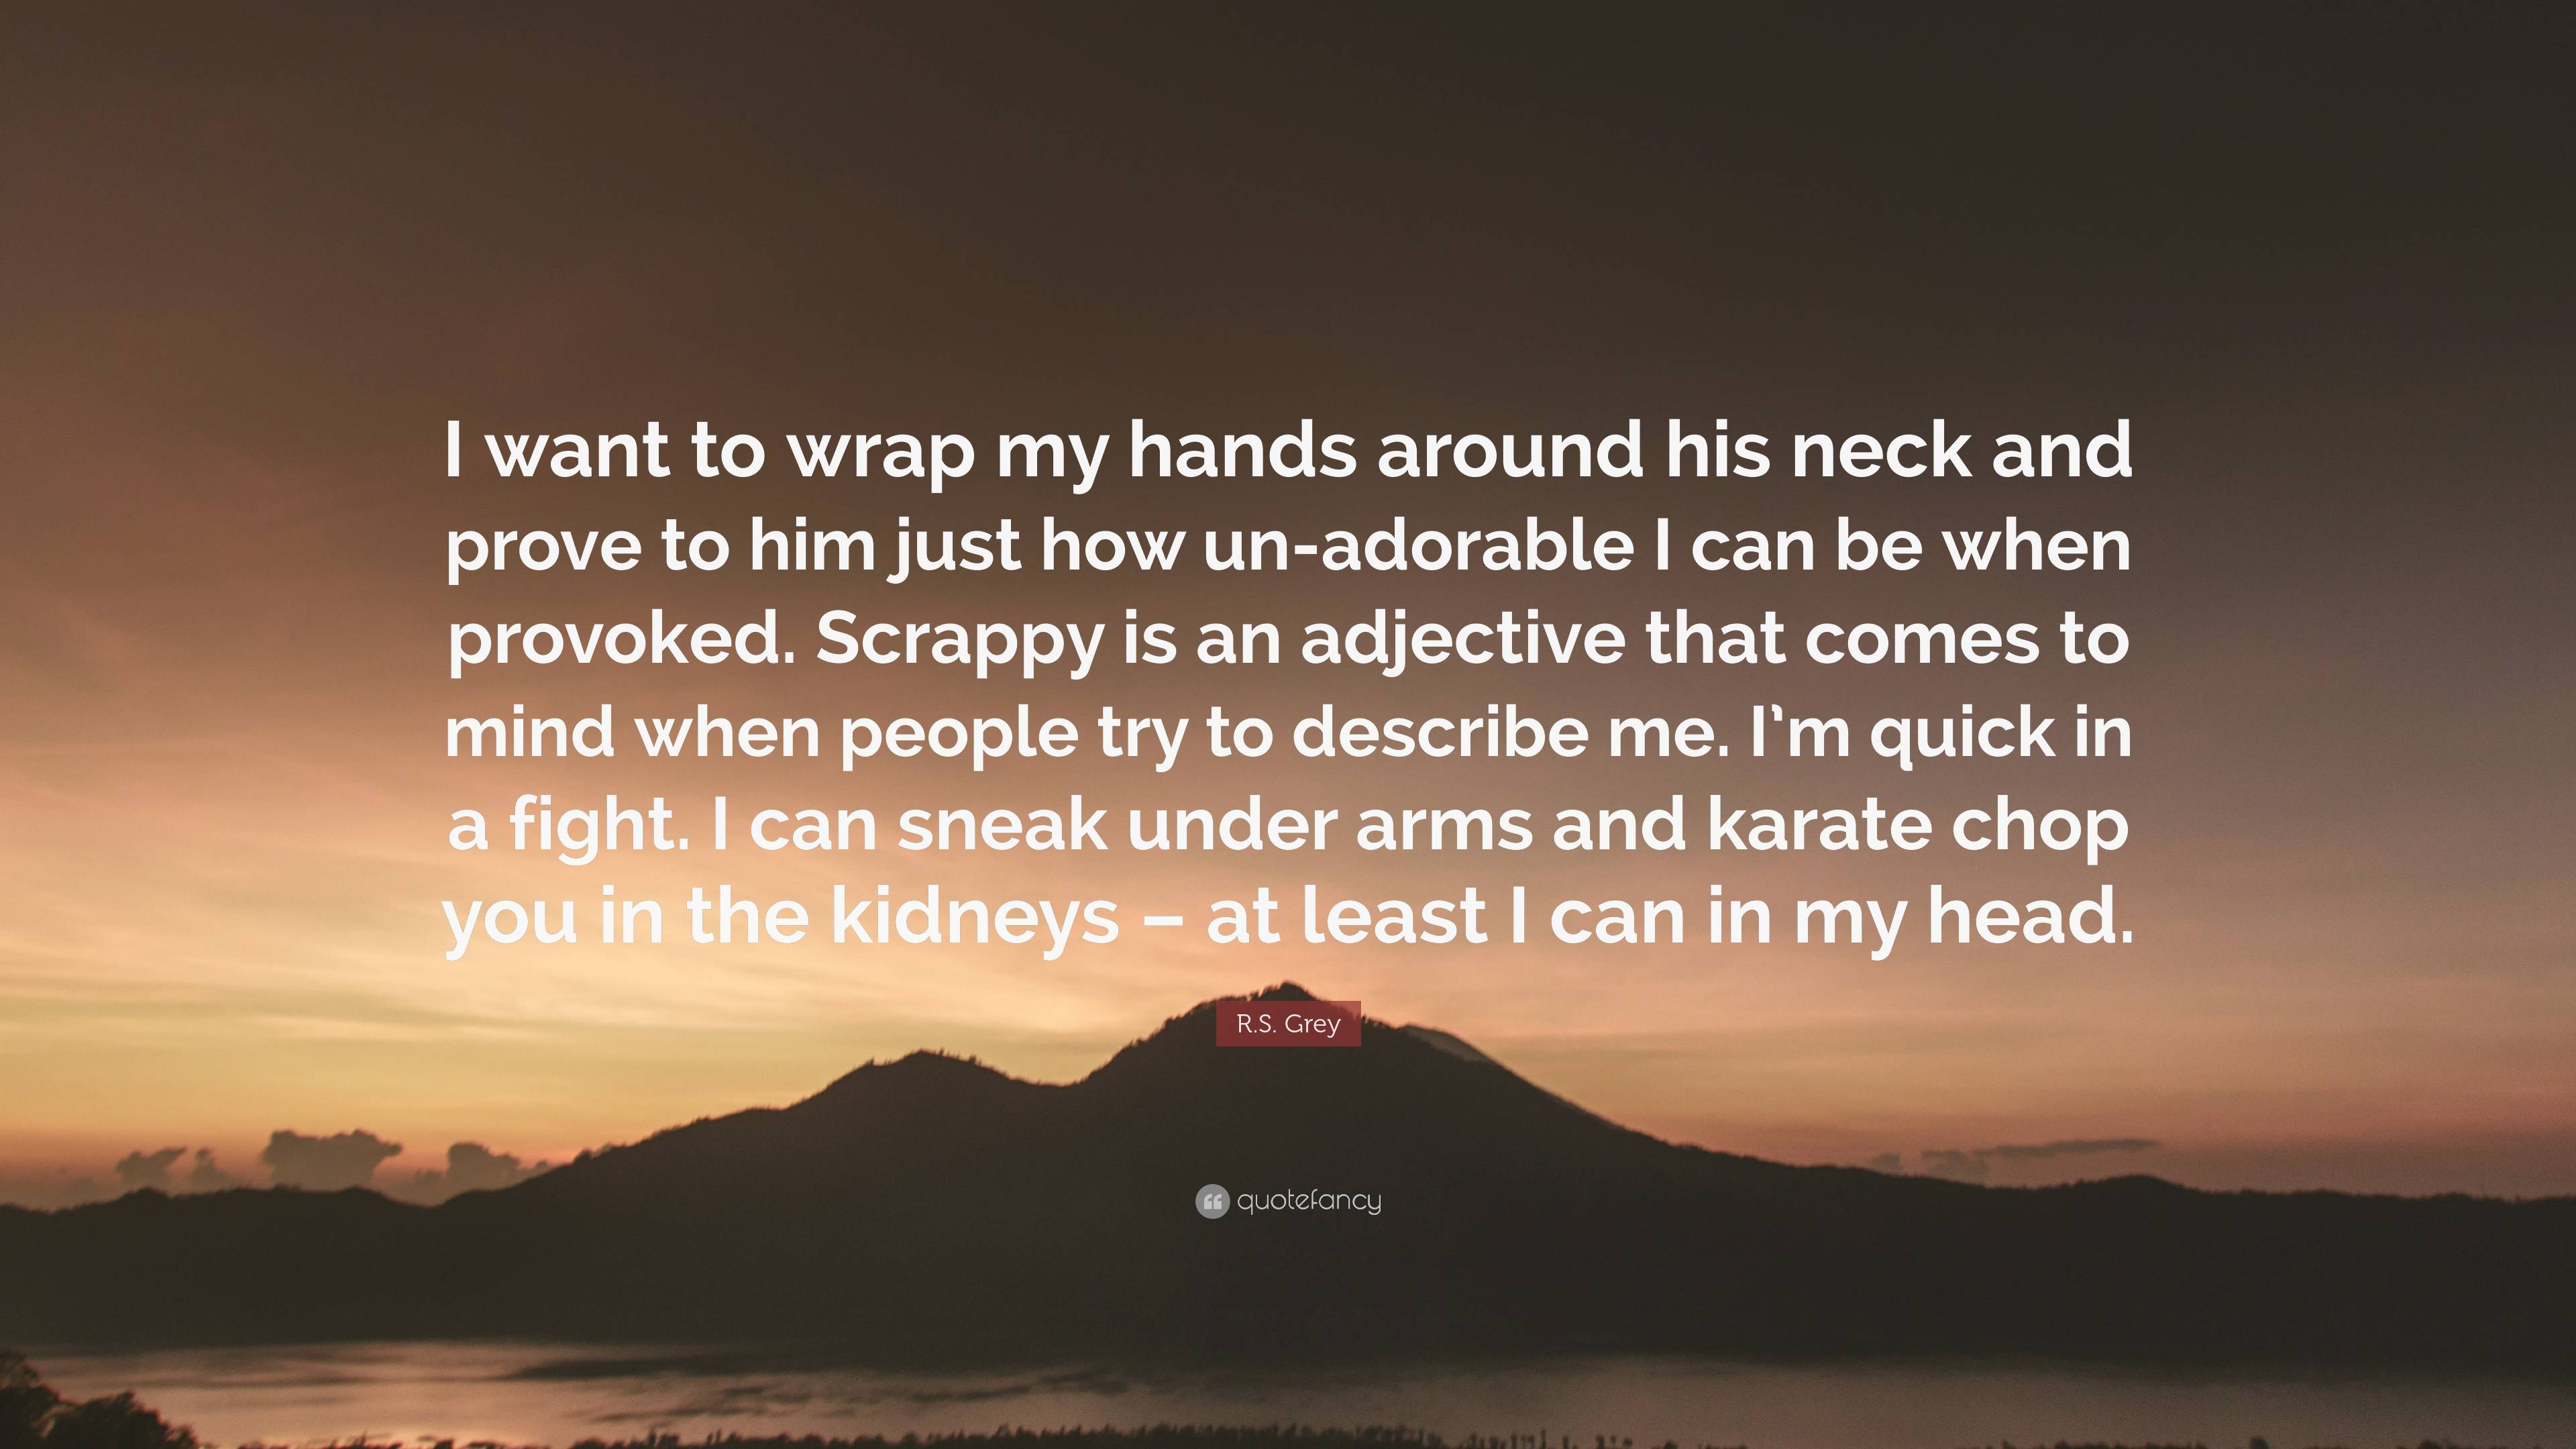 https://quotefancy.com/media/wallpaper/3840x2160/7286260-R-S-Grey-Quote-I-want-to-wrap-my-hands-around-his-neck-and-prove.jpg